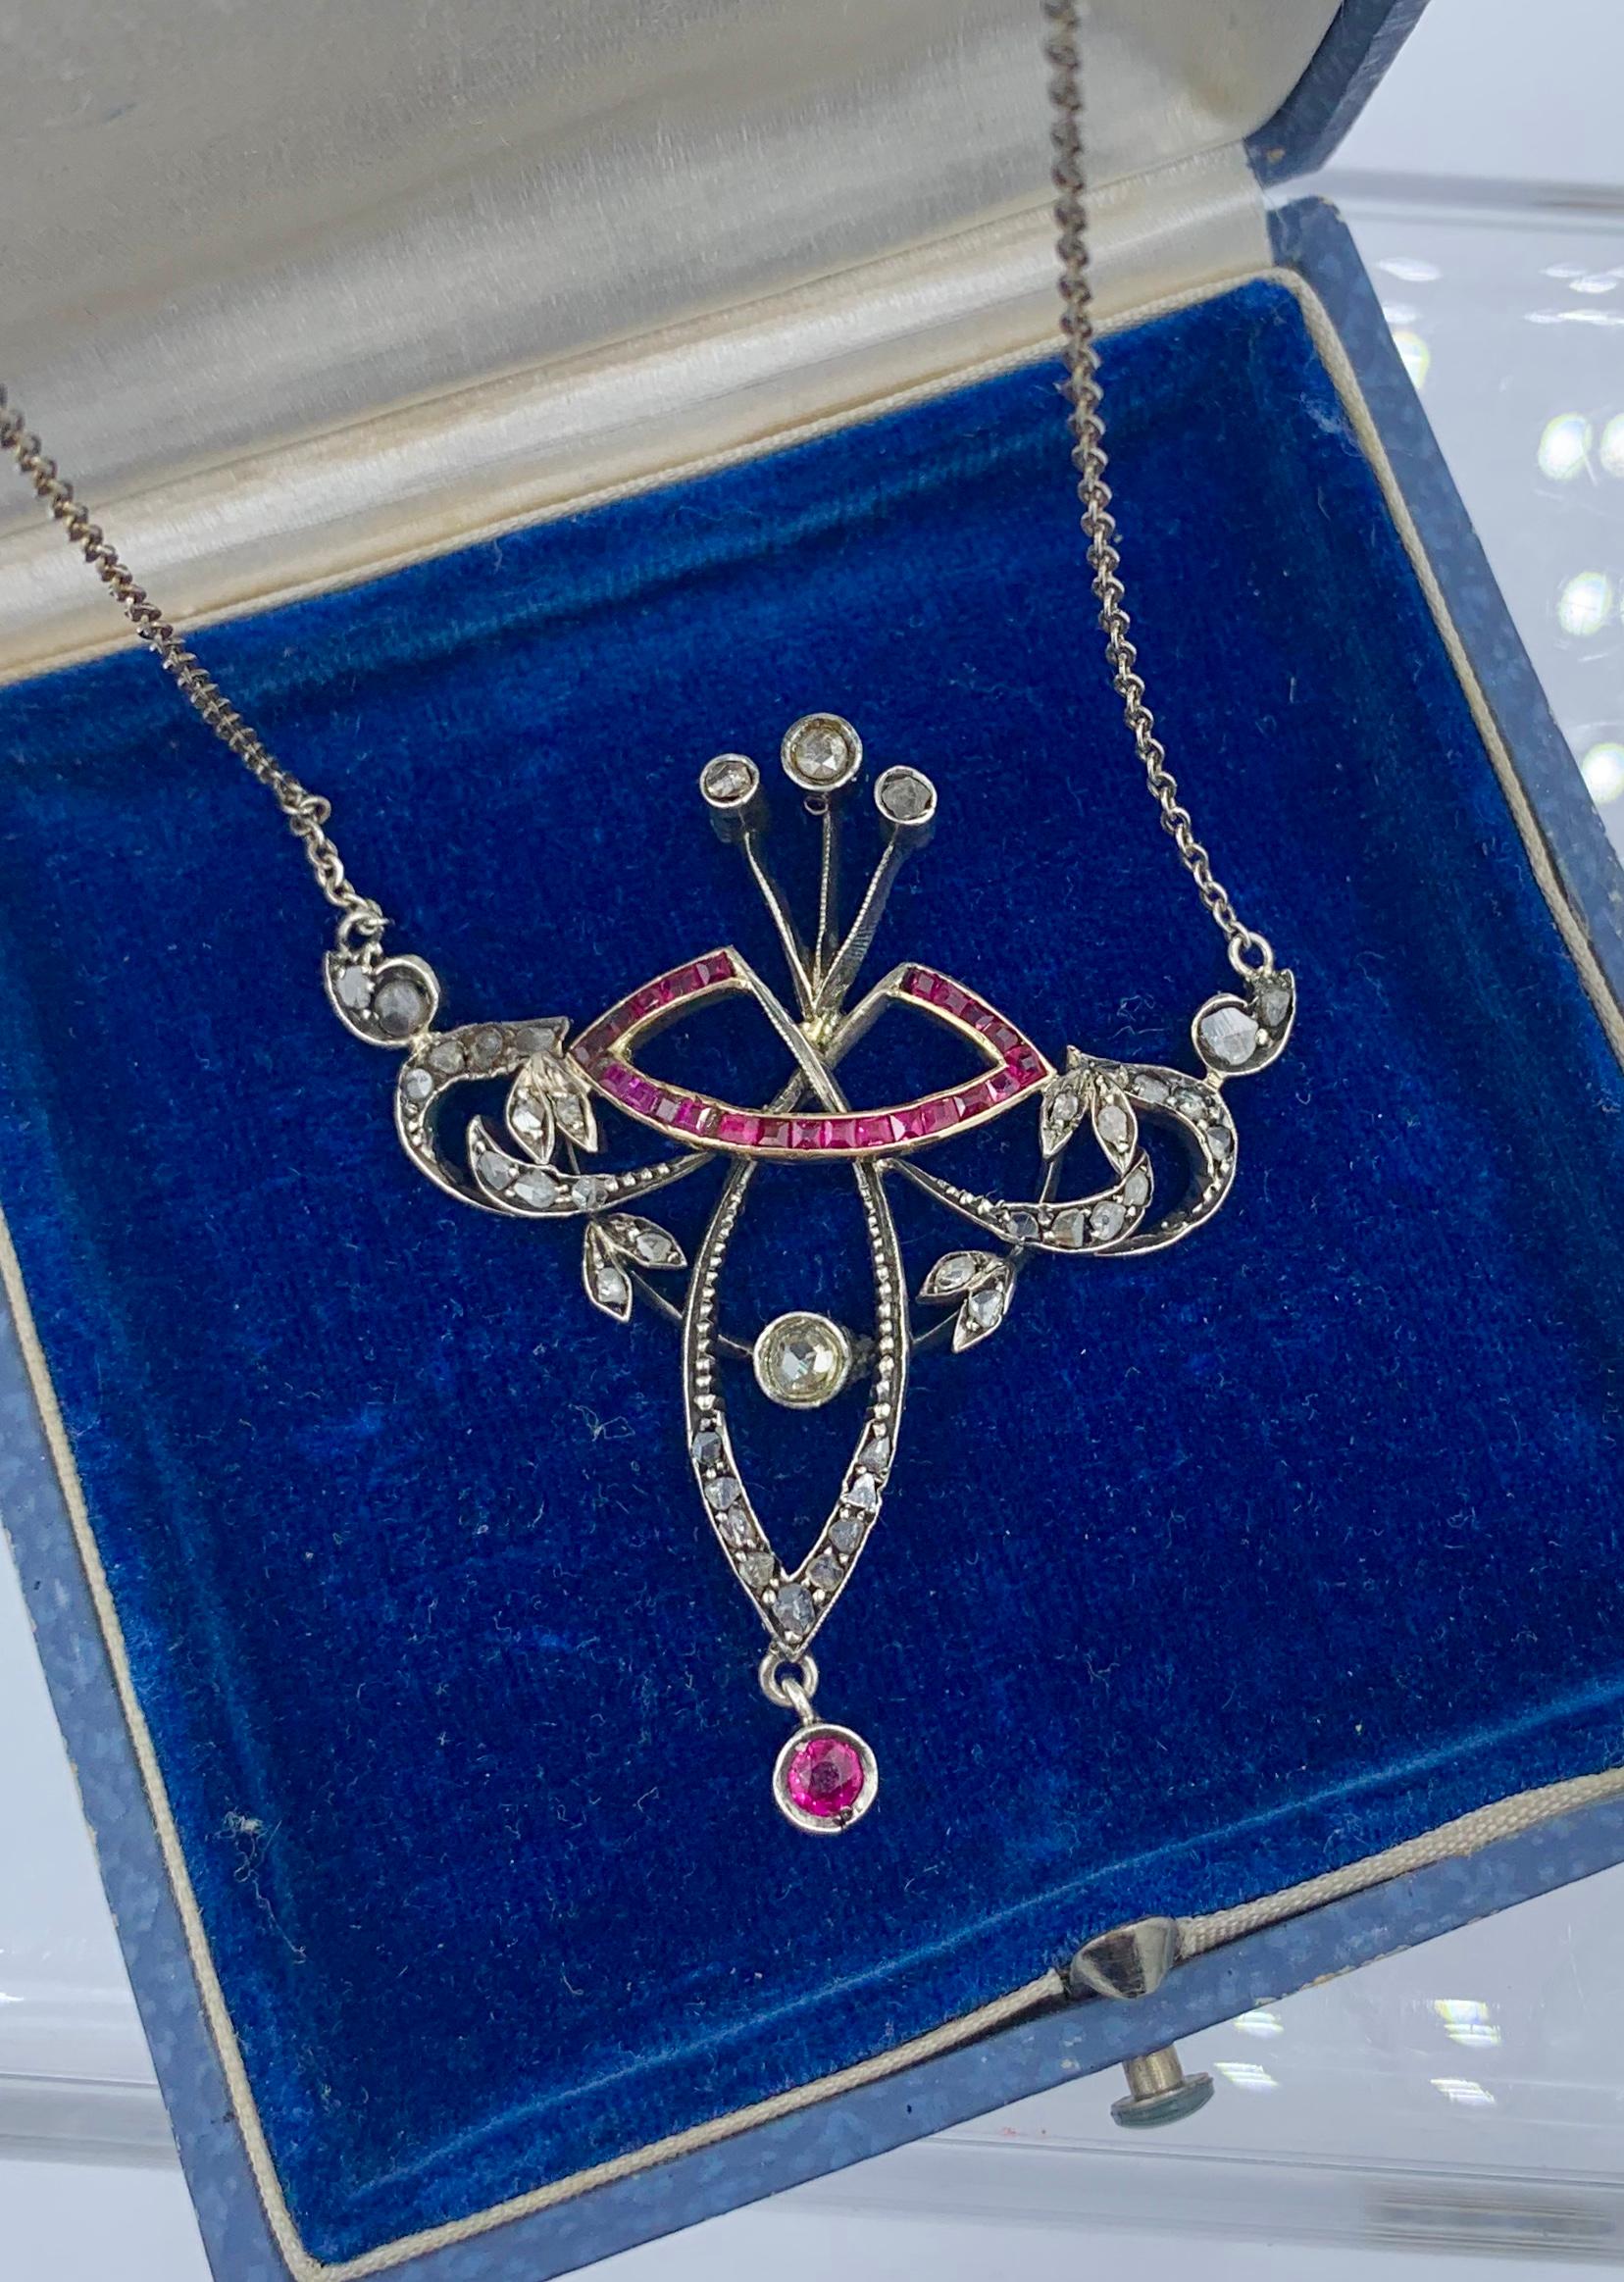 This is an extraordinary museum quality Art Nouveau, Belle Epoque Pendant Necklace set with Rose Cut Diamonds and channel set Rubies in a scroll motif open work crown design.  The jewels are set in 14 Karat Gold.   The Rose Cut Diamonds sparkle with